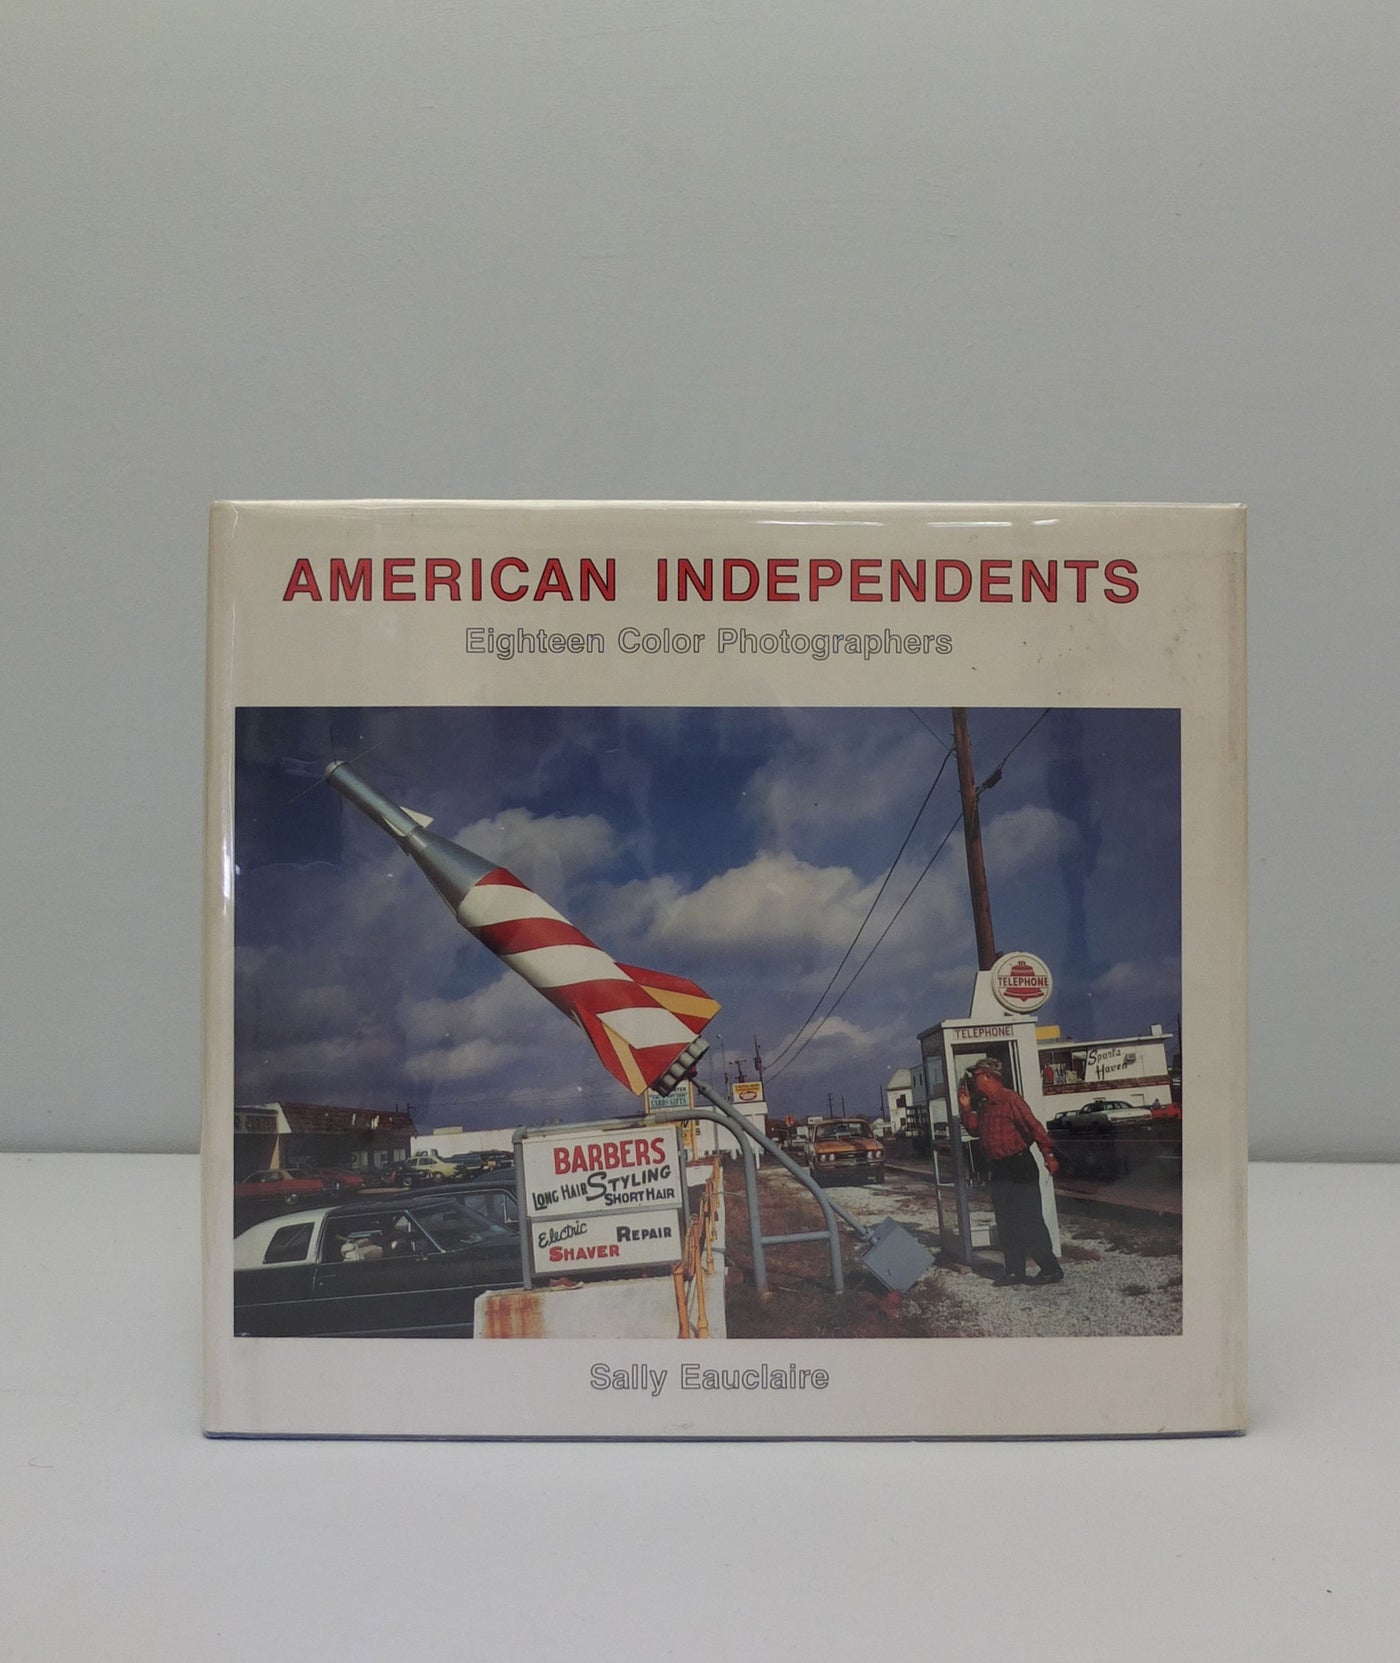 American Independents: Eighteen Color Photographers by Sally Eauclaire}